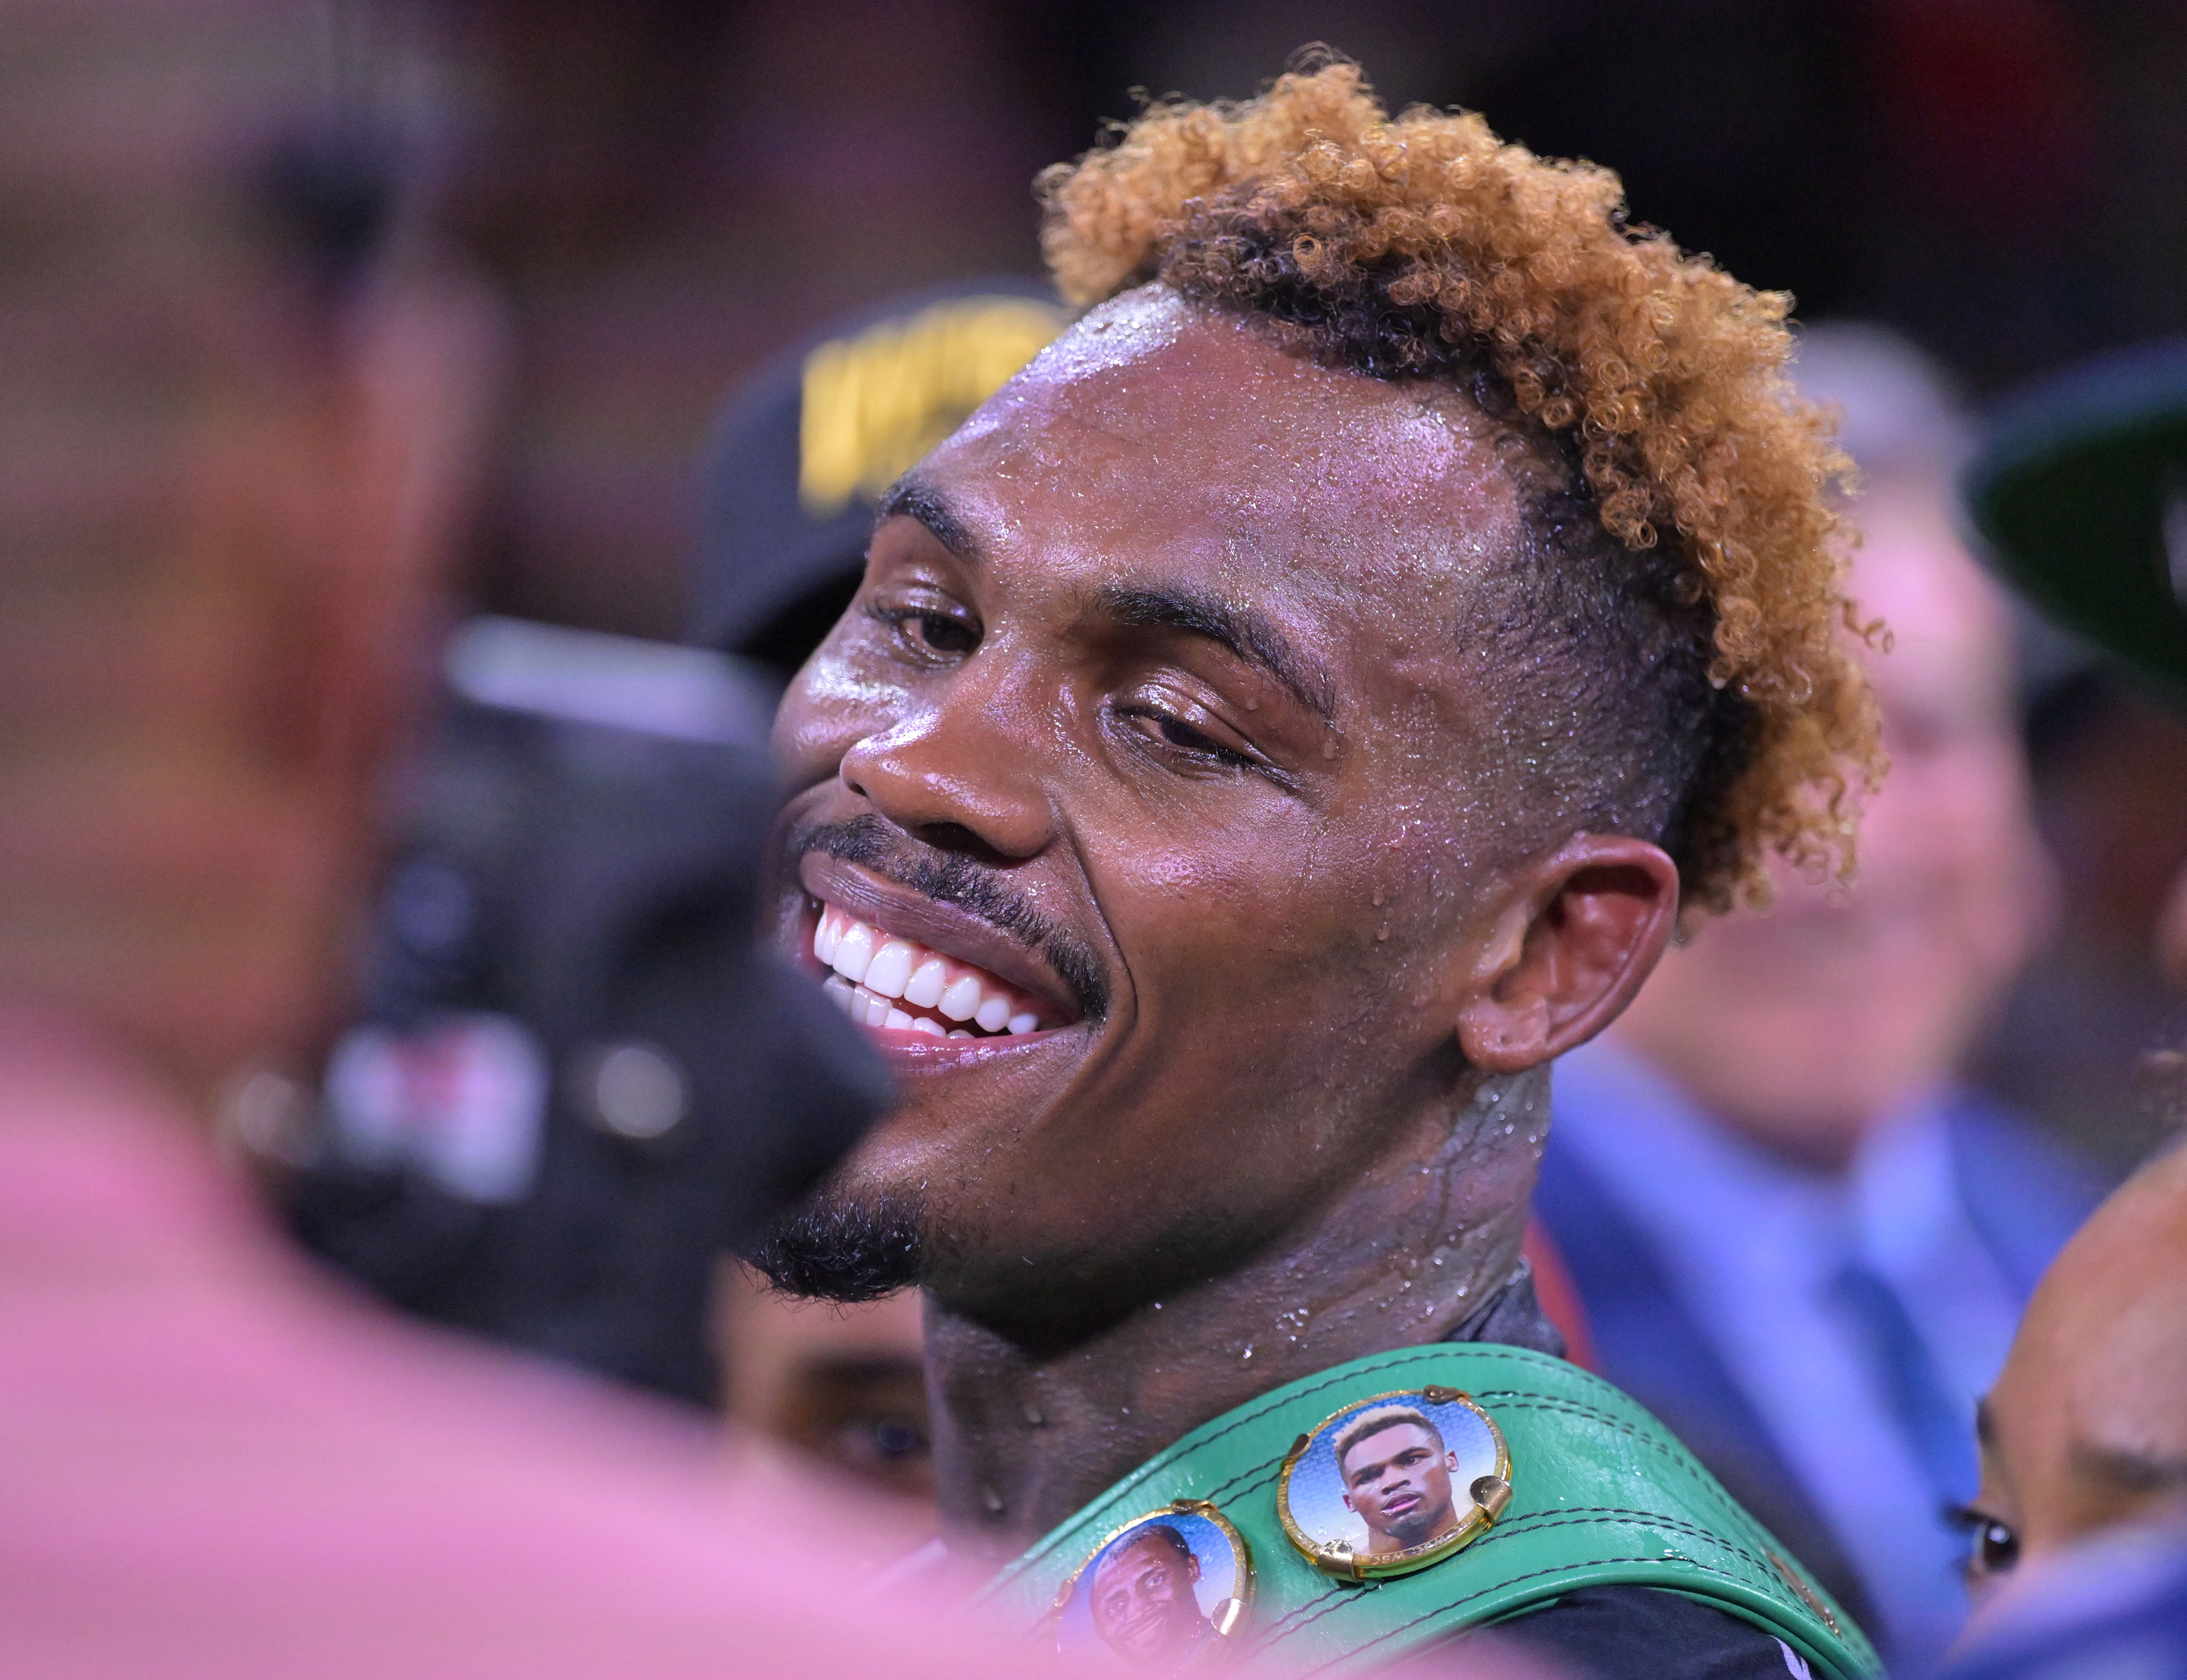 Jermell Charlo believes Terence Crawford is all talk but doesn’t really want to face elite competition.